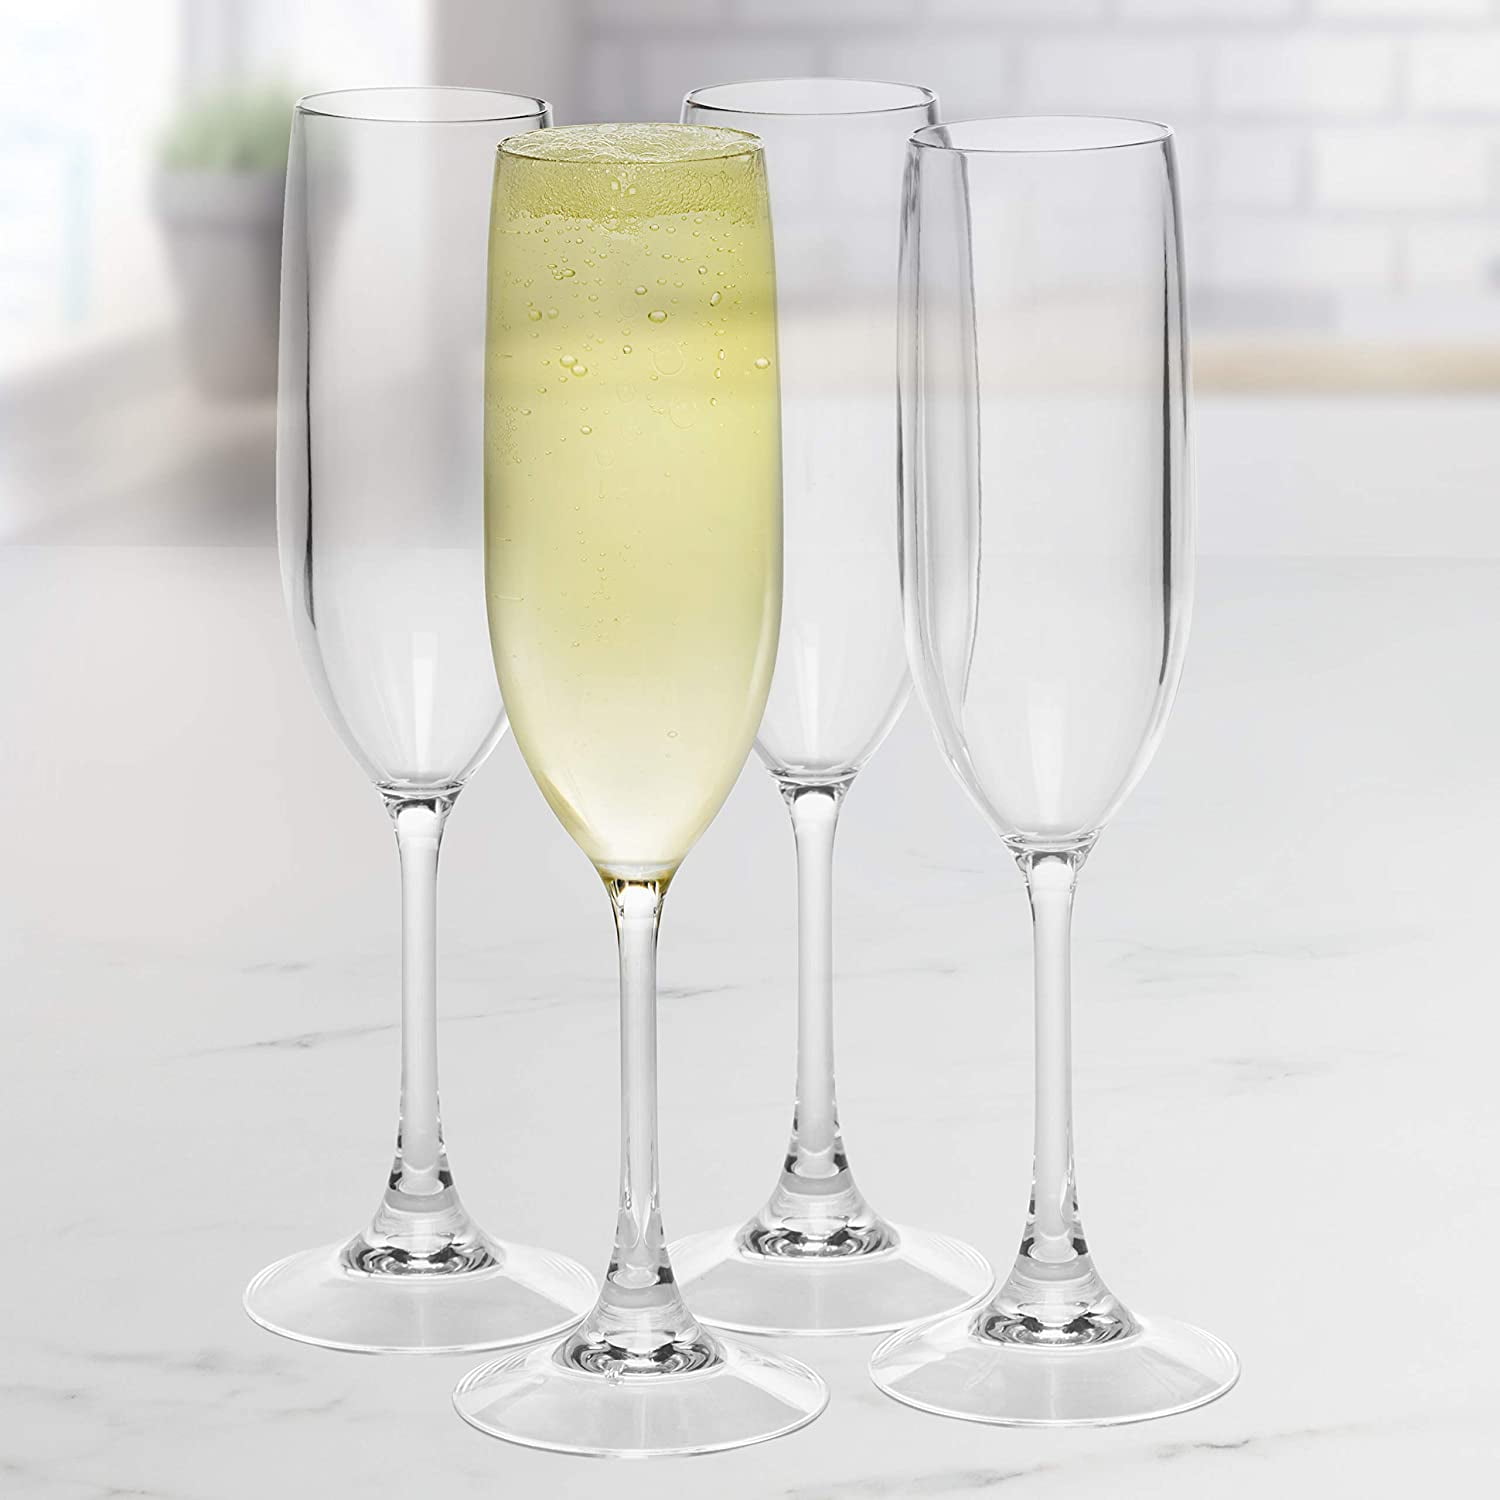 Cork Genius Insulated Stemless Champagne Flutes, 4.25 Oz Double Walled  Champagne Glasses, Dishwasher-Safe, Drinking Glasses for Wedding,  Bridesmaid